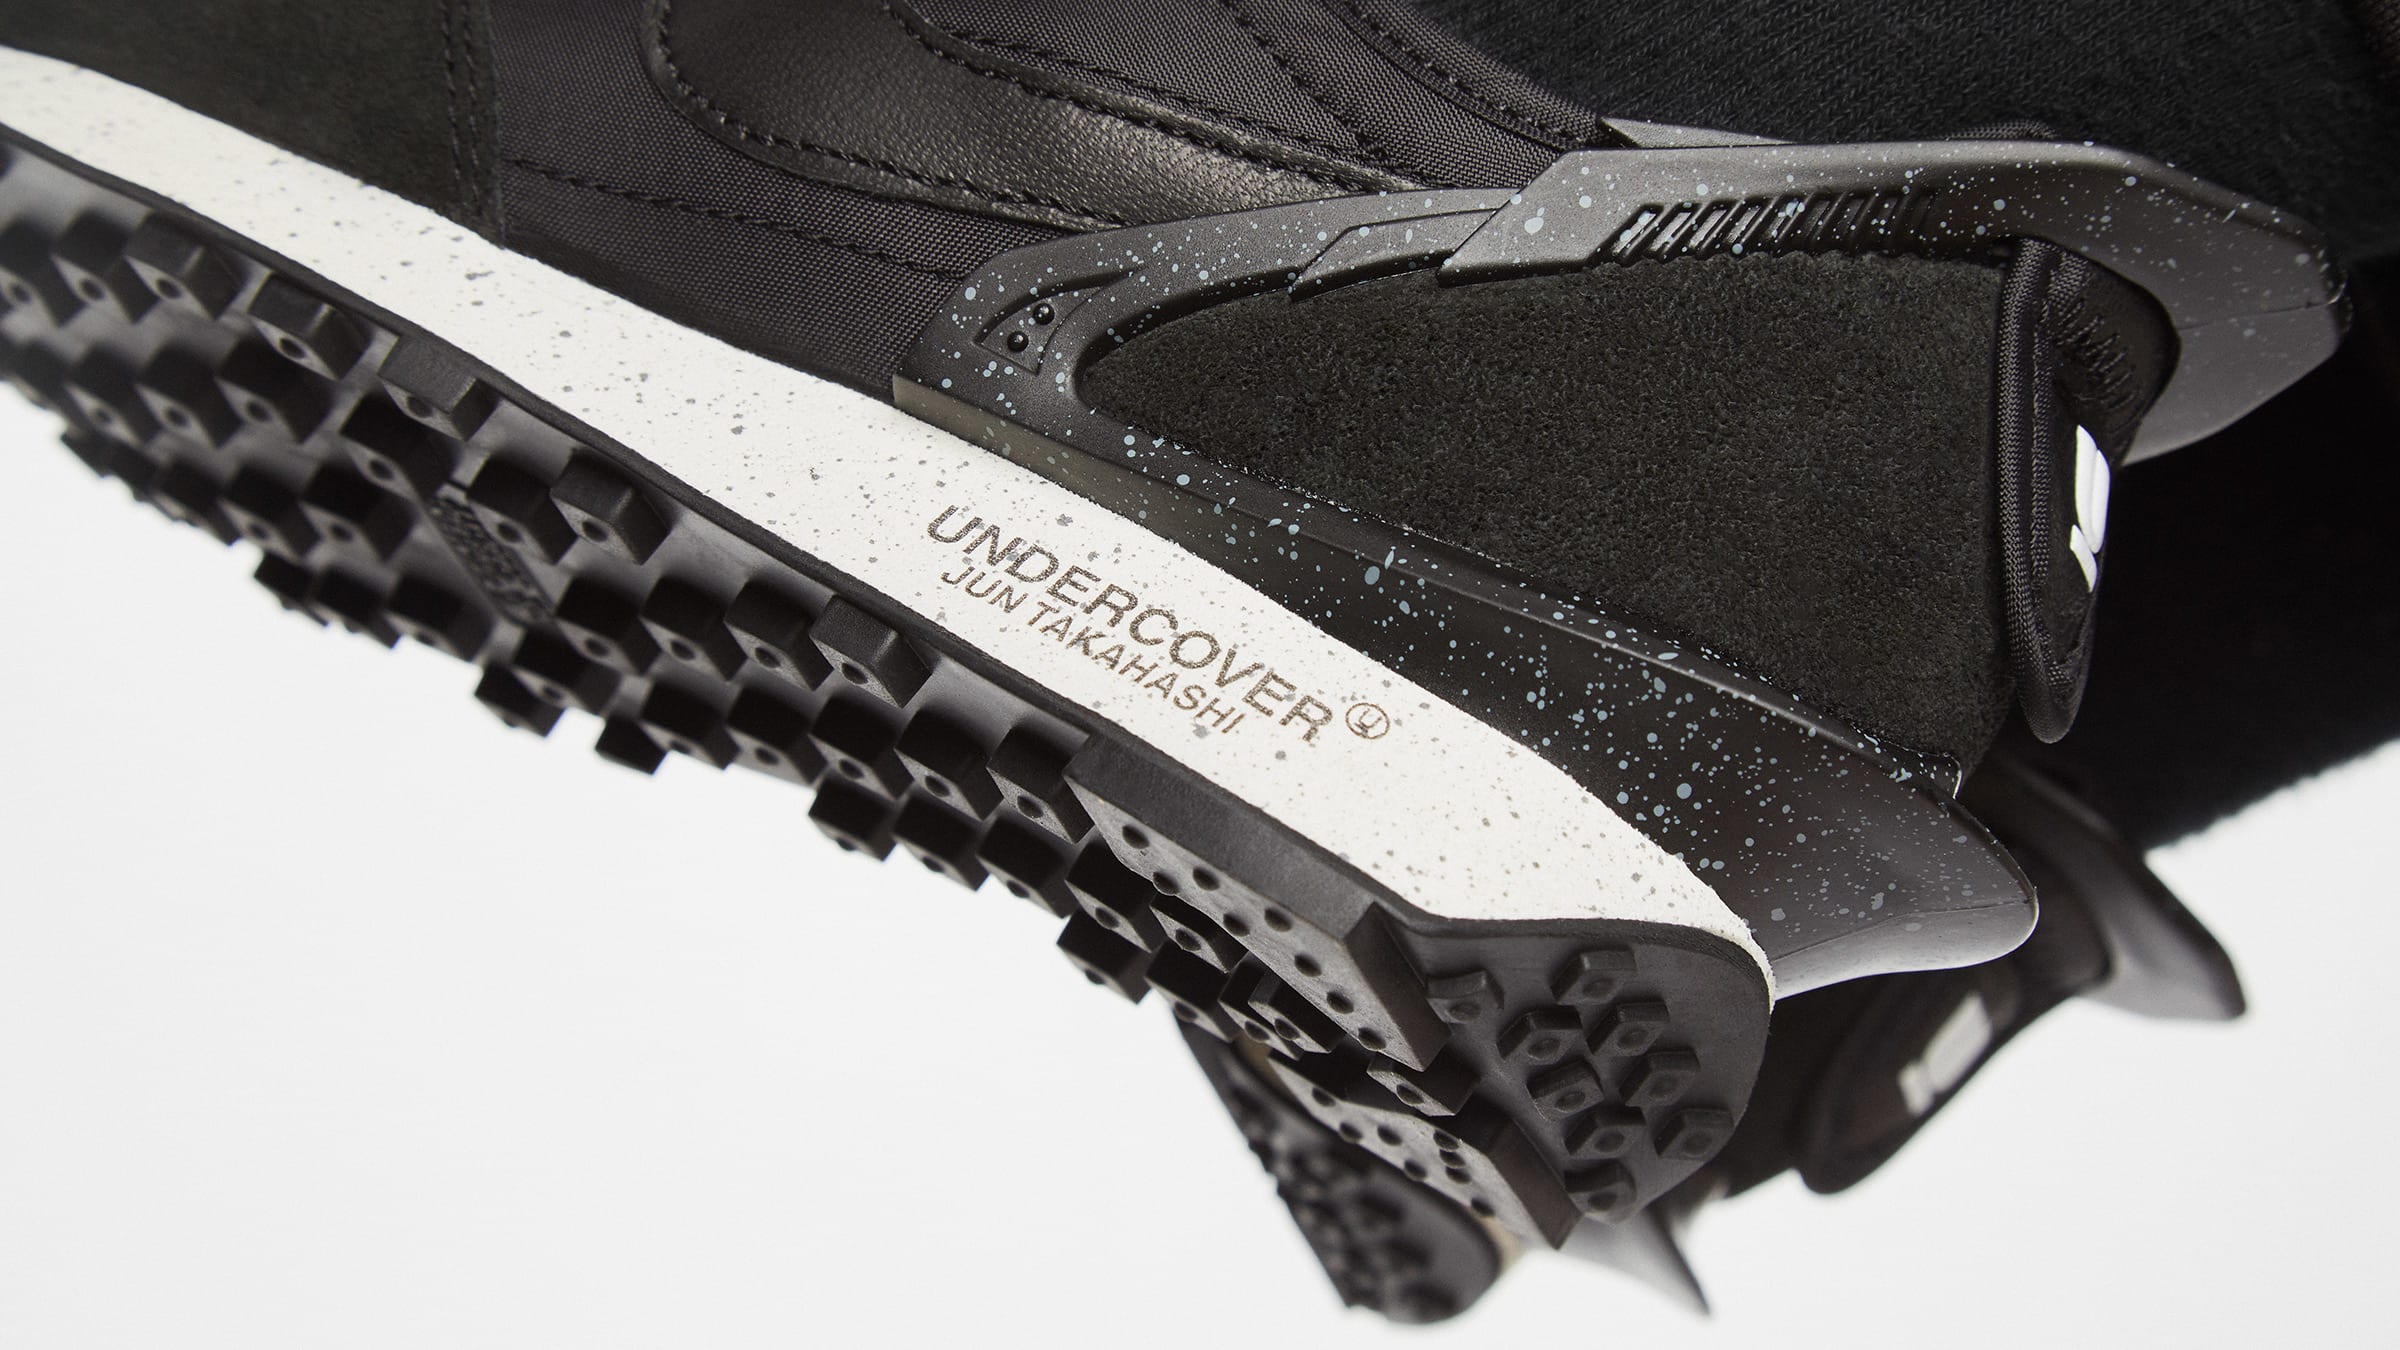 Nike x Undercover Daybreak (Black & Sail) | END. Launches